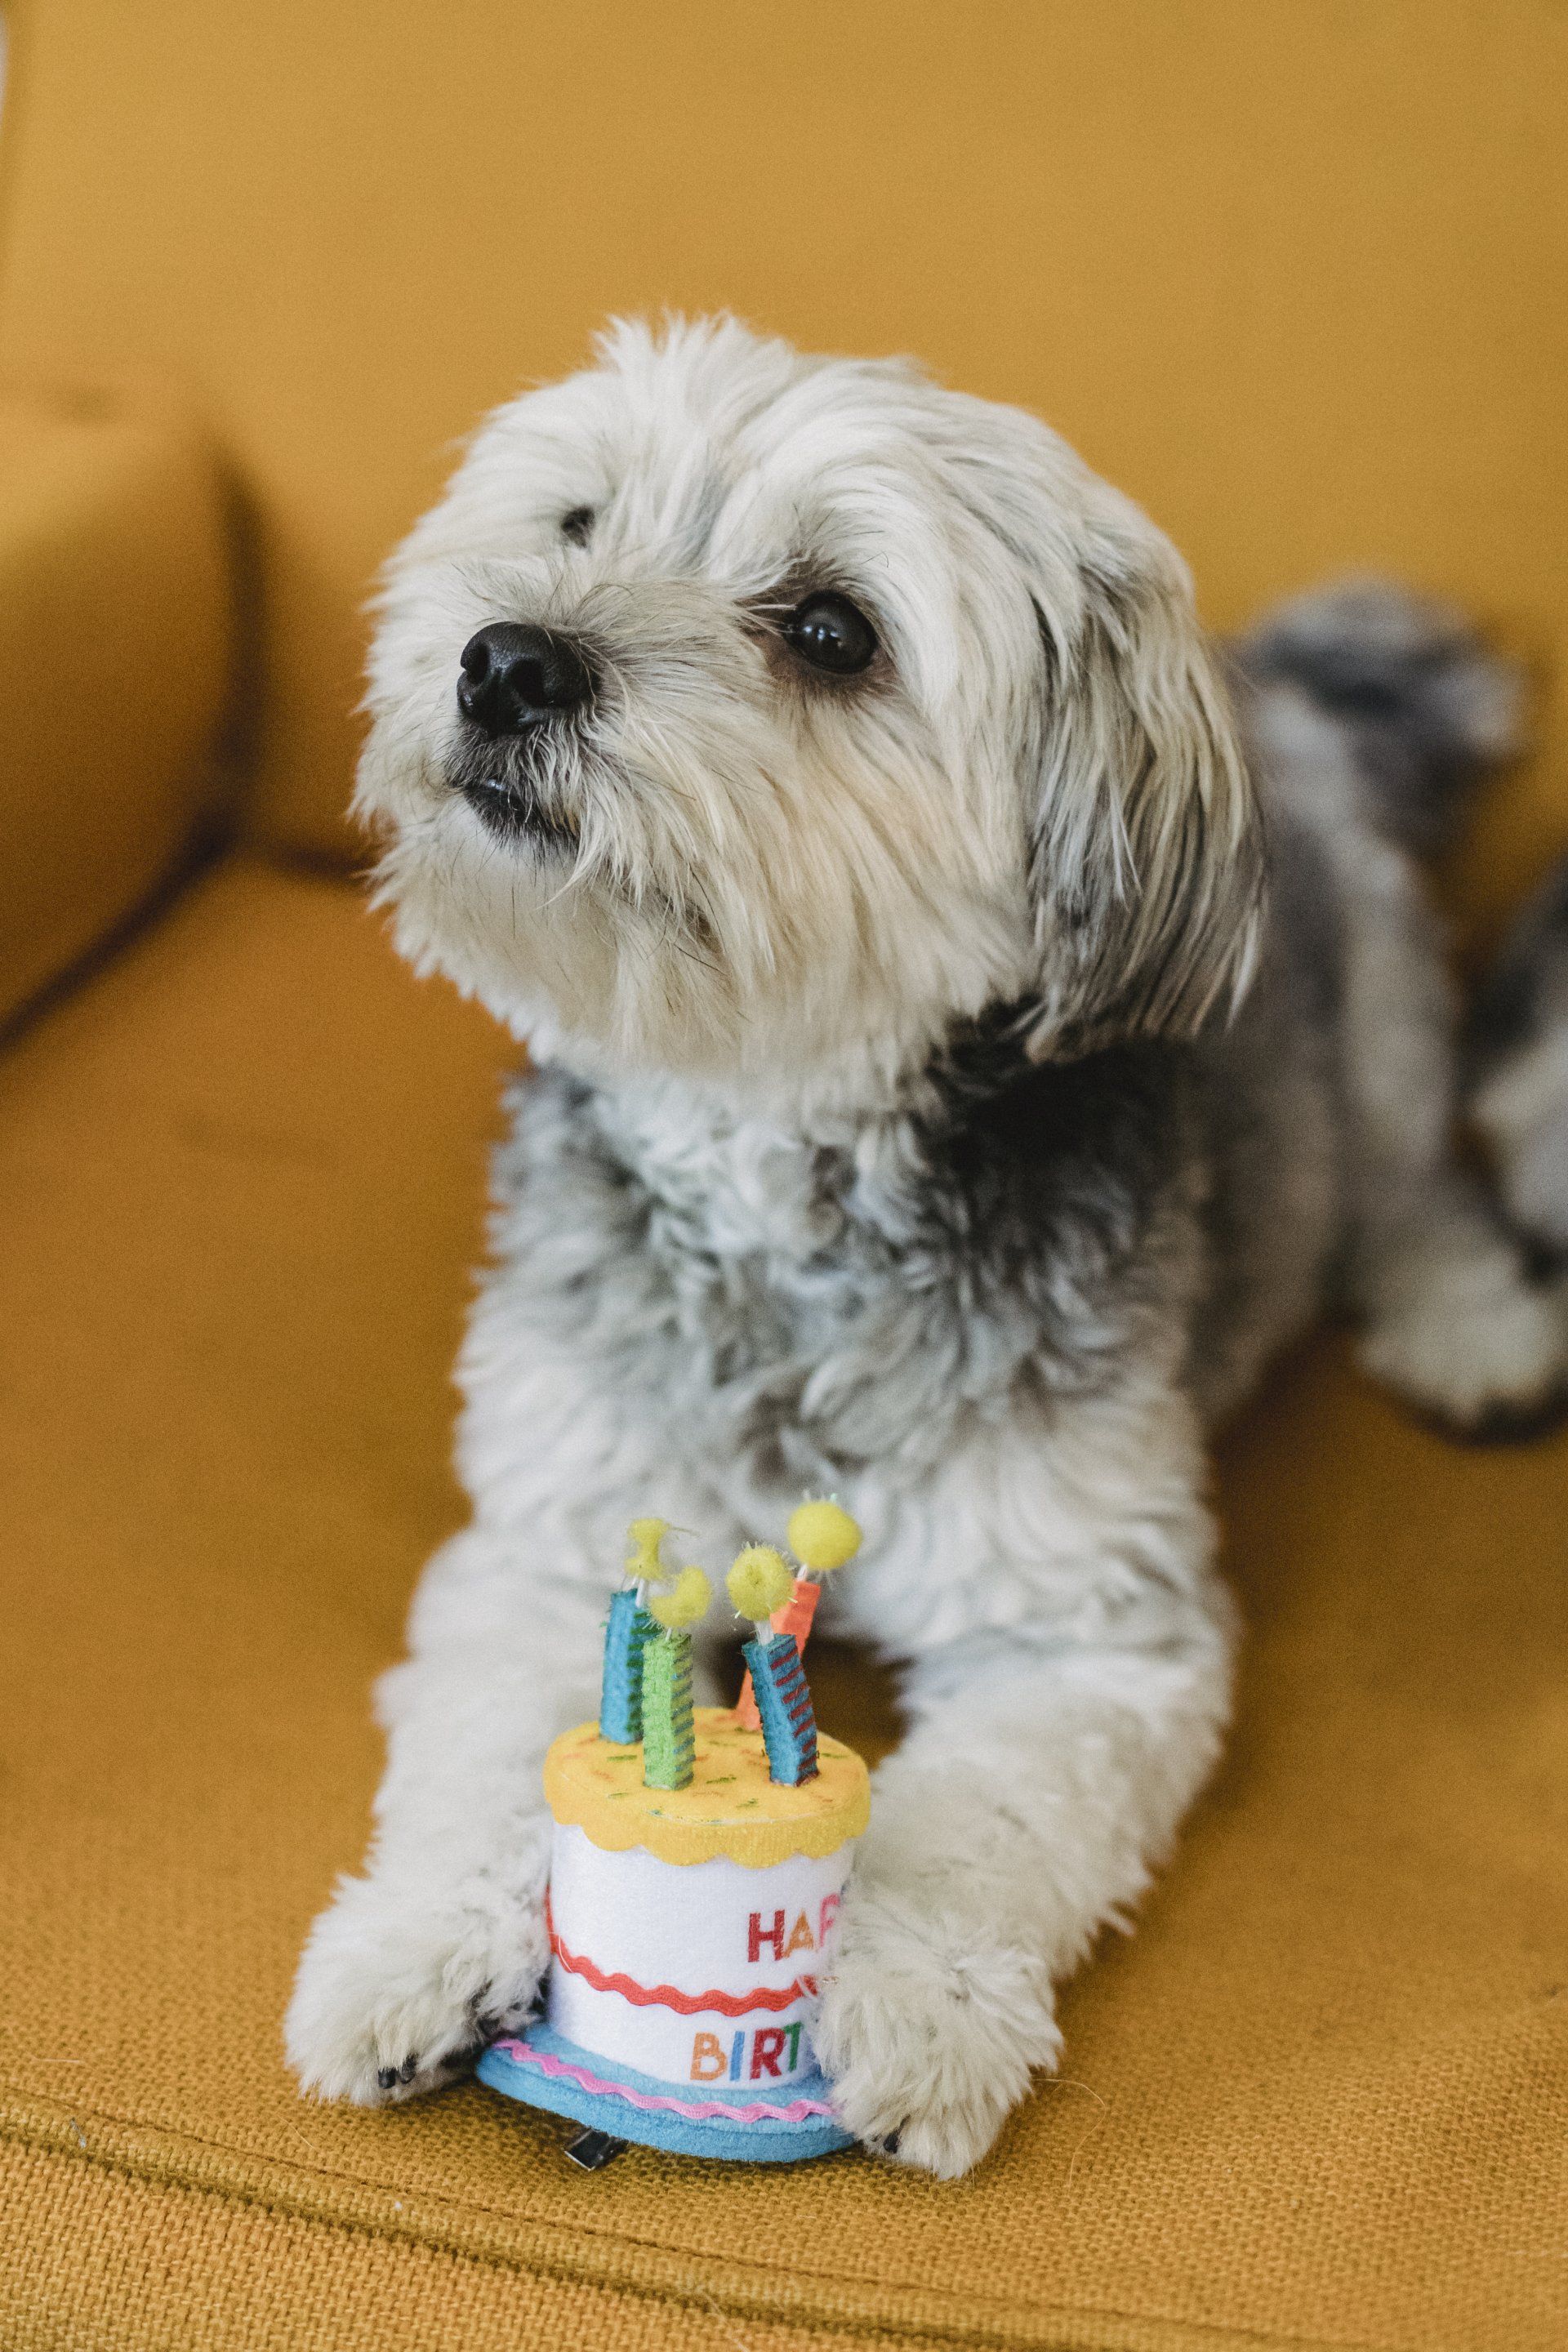 a small white dog is laying on a yellow couch holding a birthday cake toy .